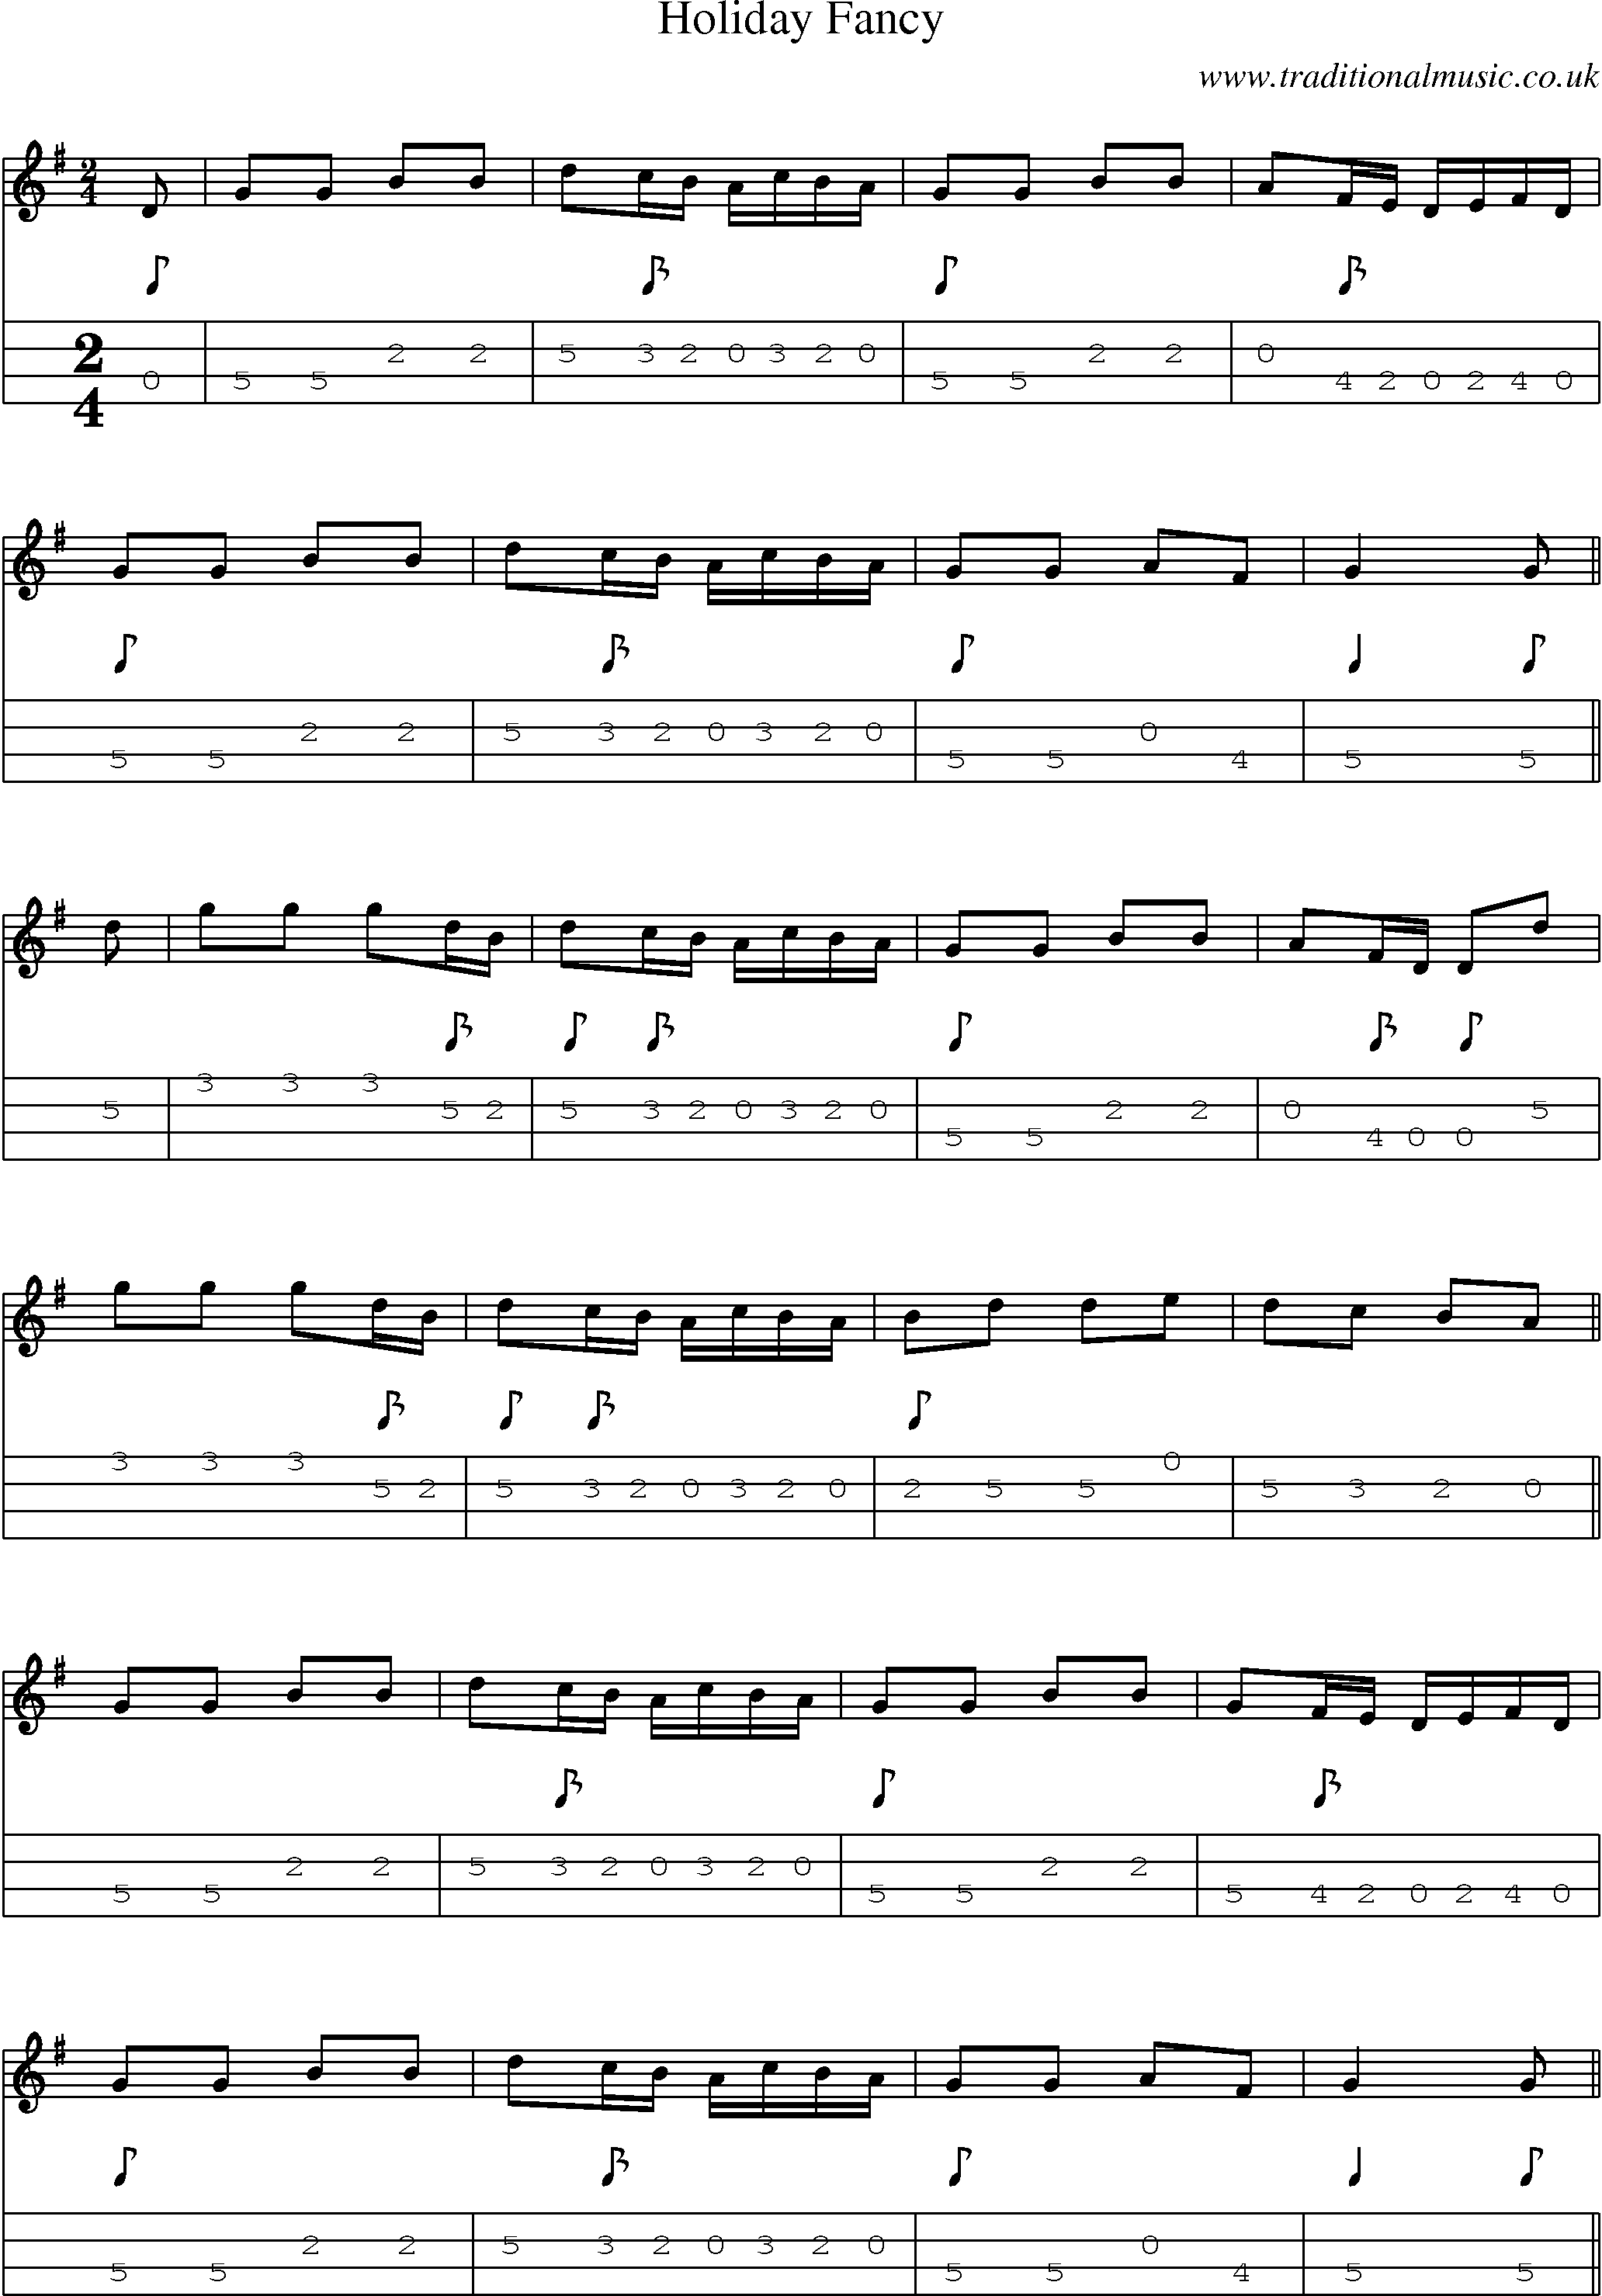 Music Score and Mandolin Tabs for Holiday Fancy